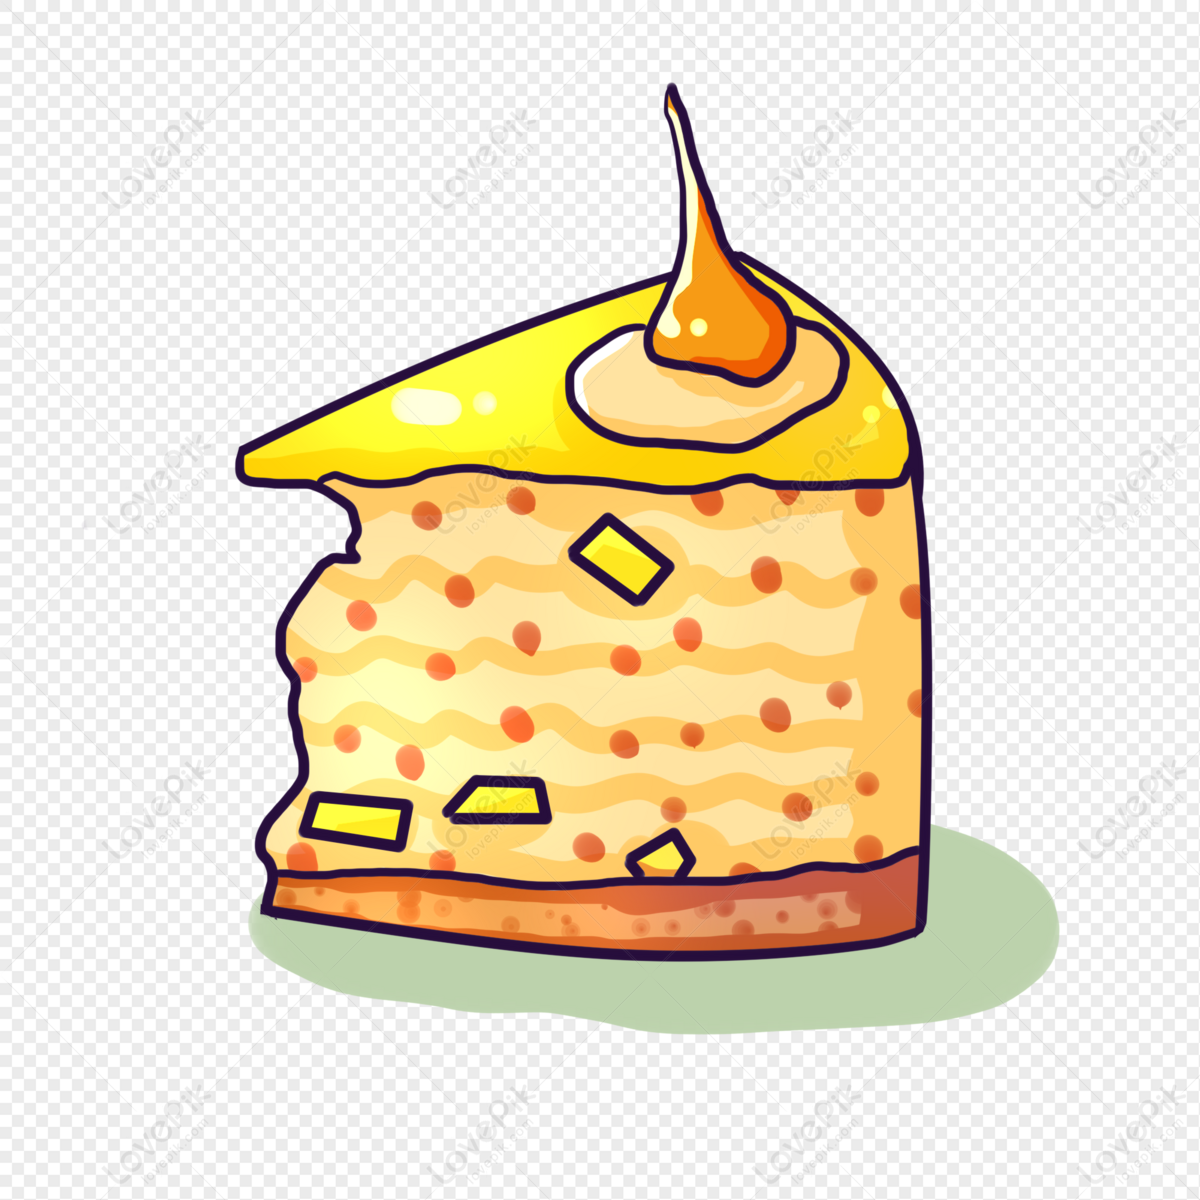 Delicious Cartoon Cake PNG Transparent Background And Clipart Image For  Free Download - Lovepik | 401408240